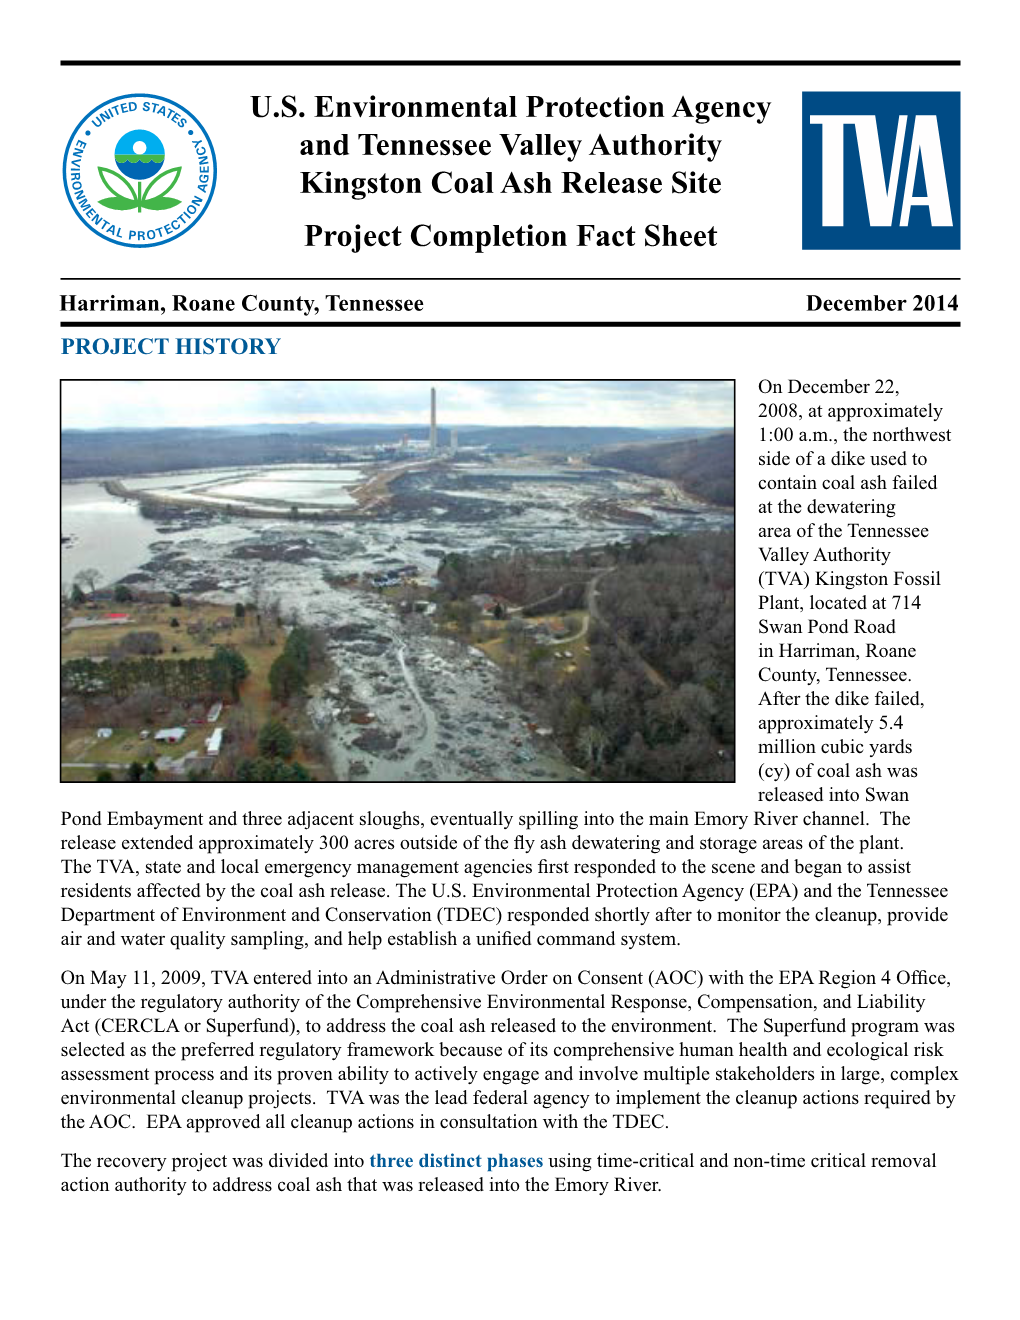 Kingston TVA Project Completion Fact Sheet